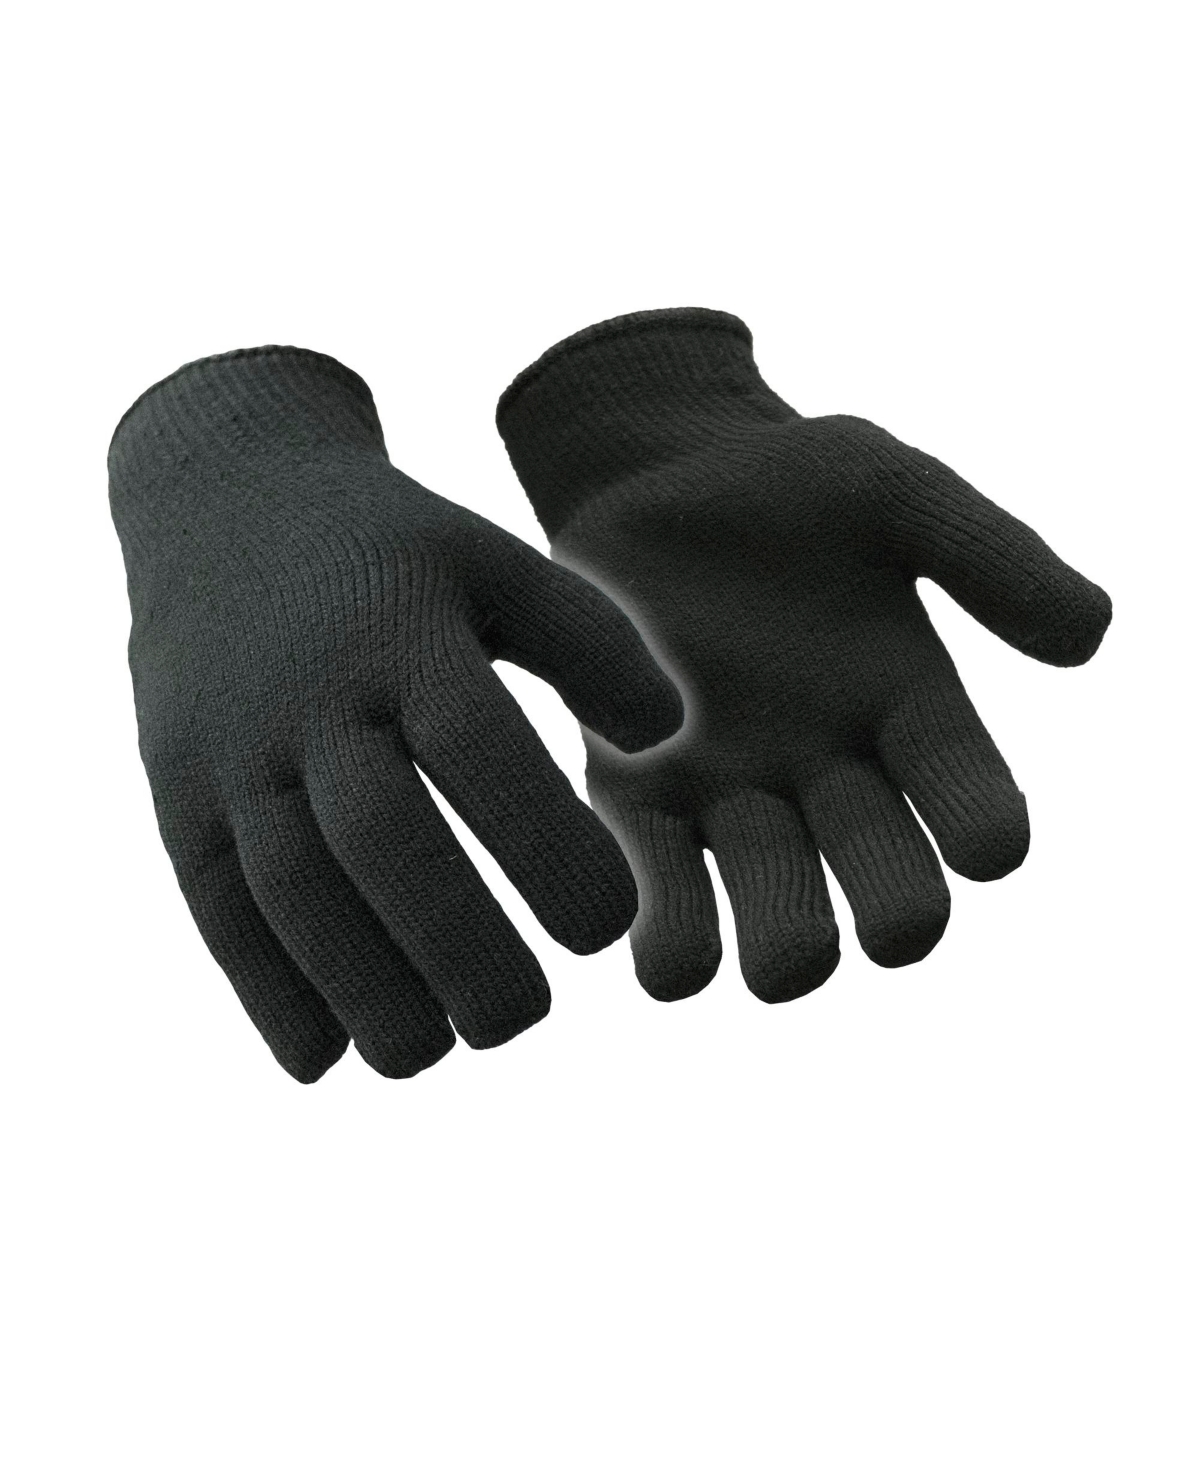 Men's Heavyweight Acrylic Loop Terry Knit Glove Liners Black (Pack of 12 Pairs) - Black